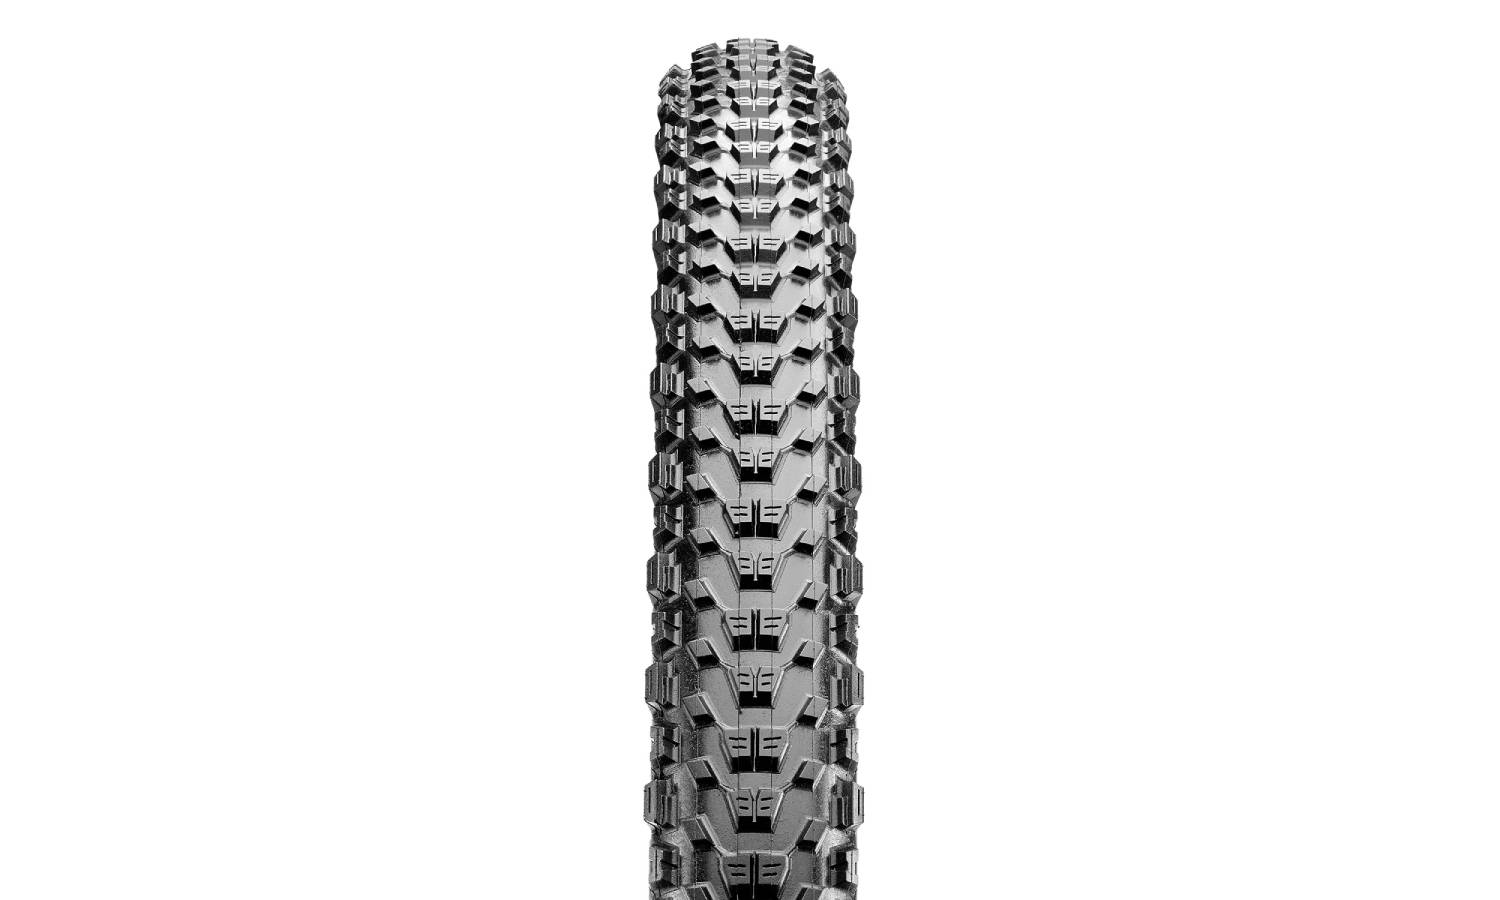 Фотография ПОКРЫШКА MAXXIS ARDENT RACE 29X2.20 60TPI WIRE SINGLE COMPOUND 2